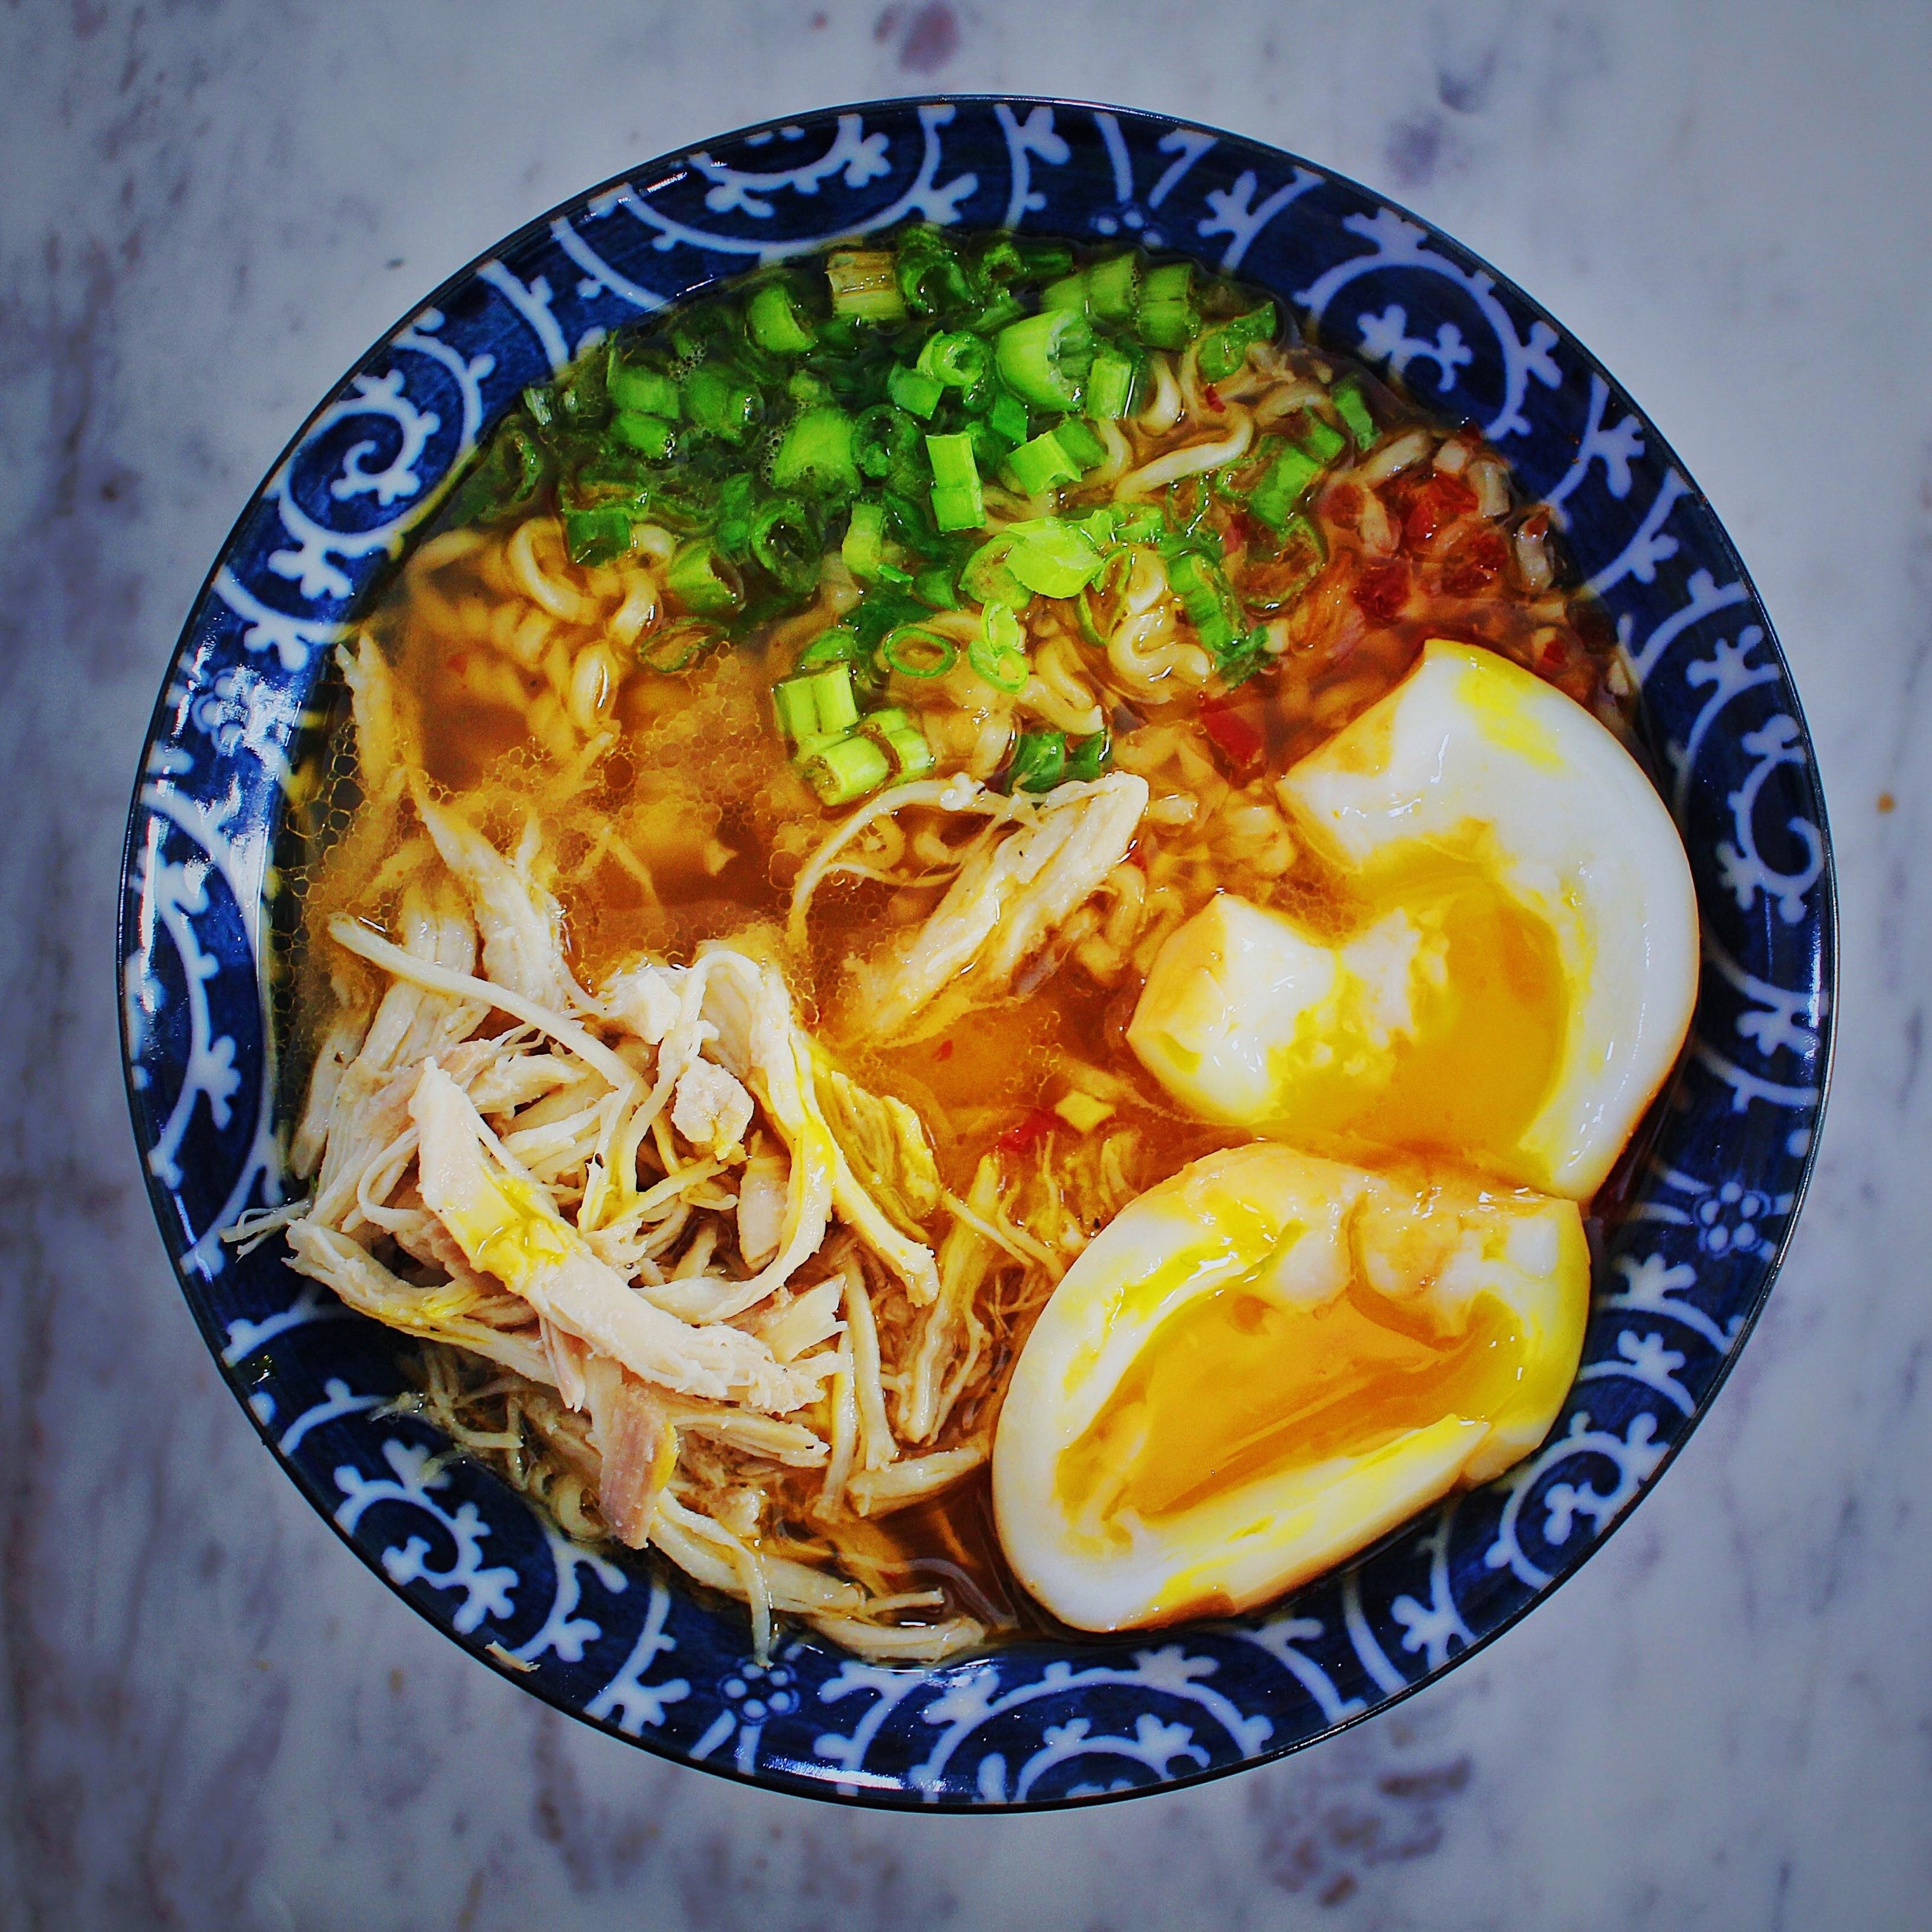 a bowl of ramen with shredded chicken, a soft-boiled egg, and scallions